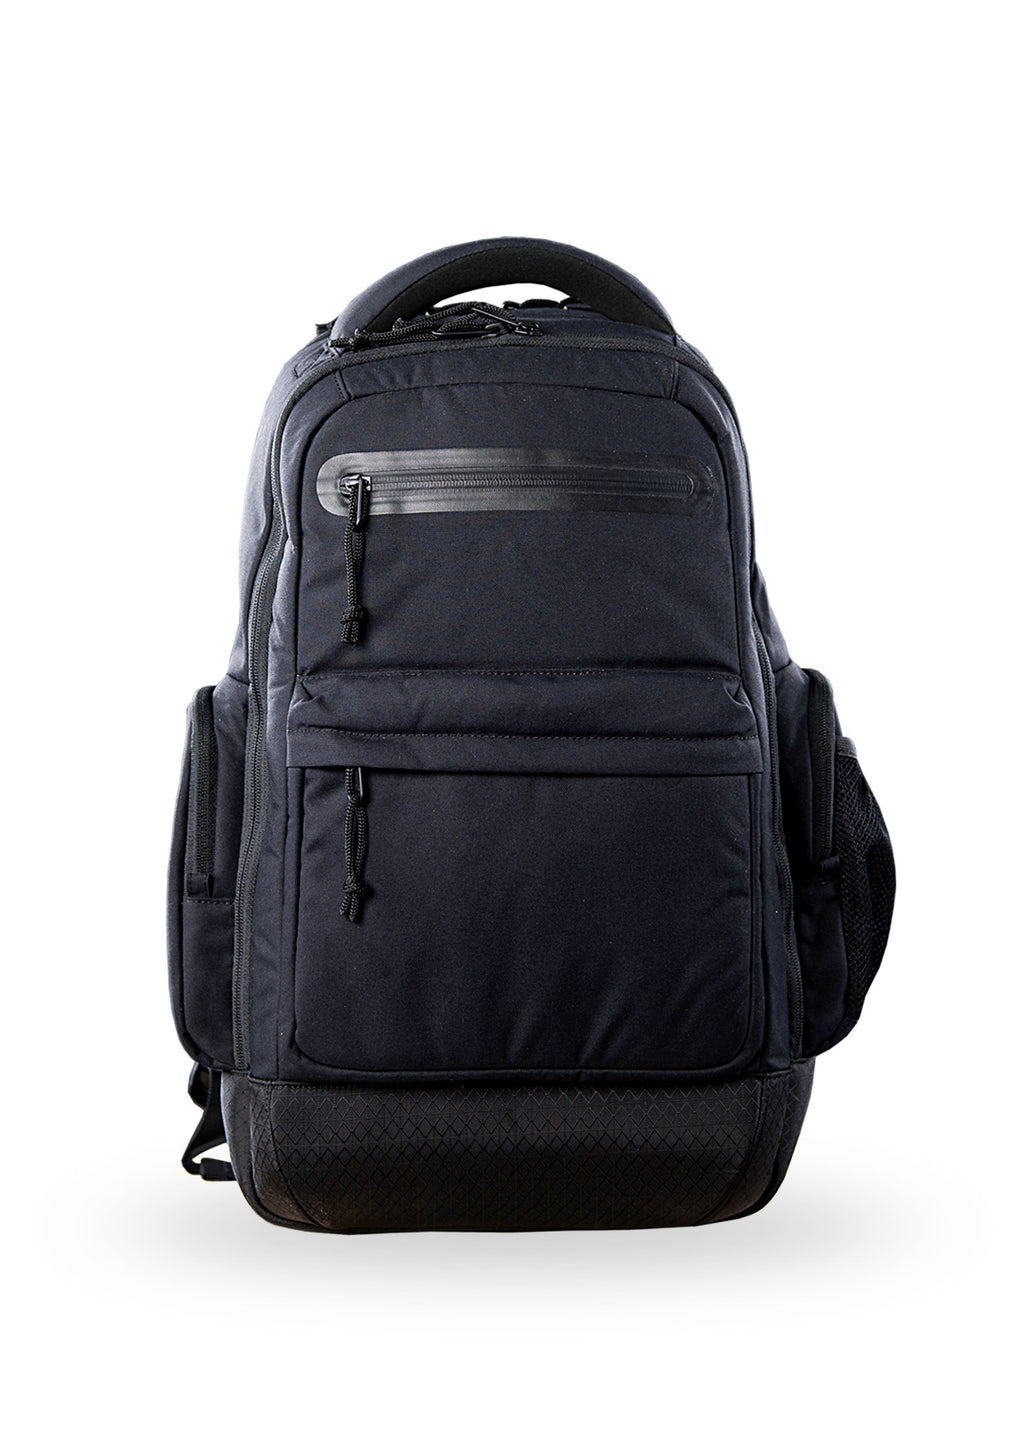 needessentials Day Pack travel backpack surfing  